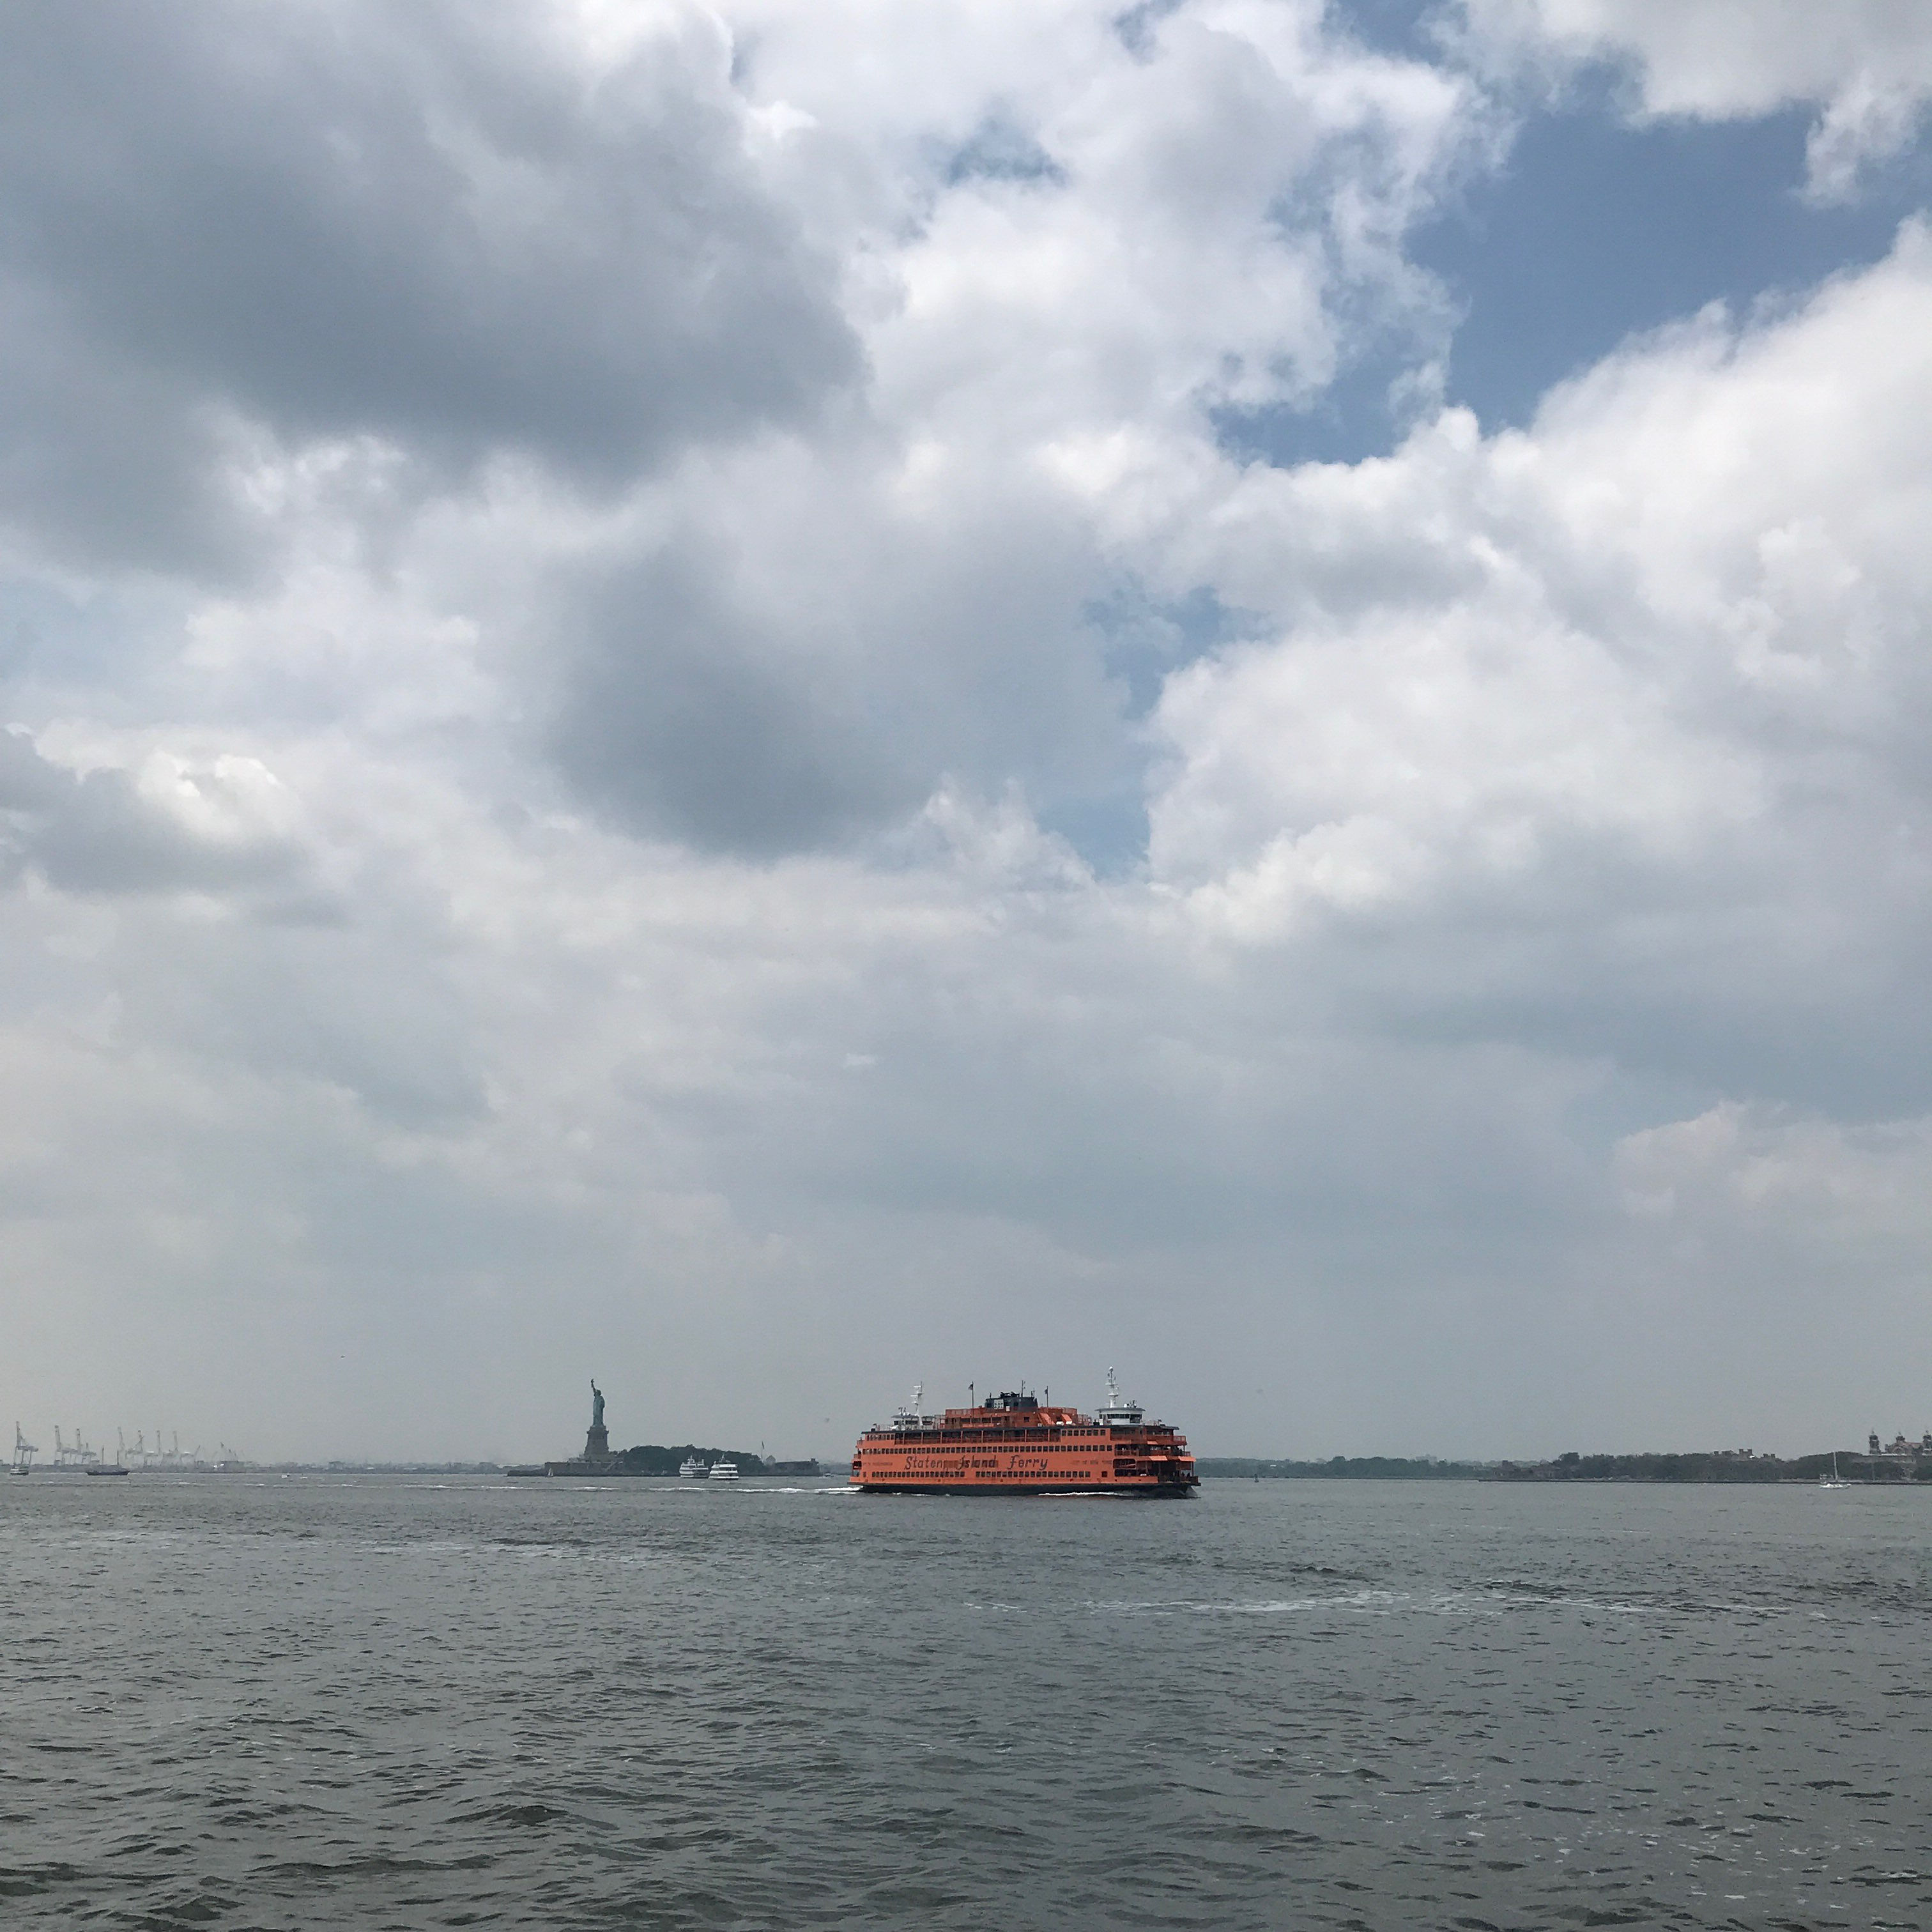 Whitehall bound Staten Island Ferry seen from the Governors Island Ferry, the Statue of Liberty in the distance